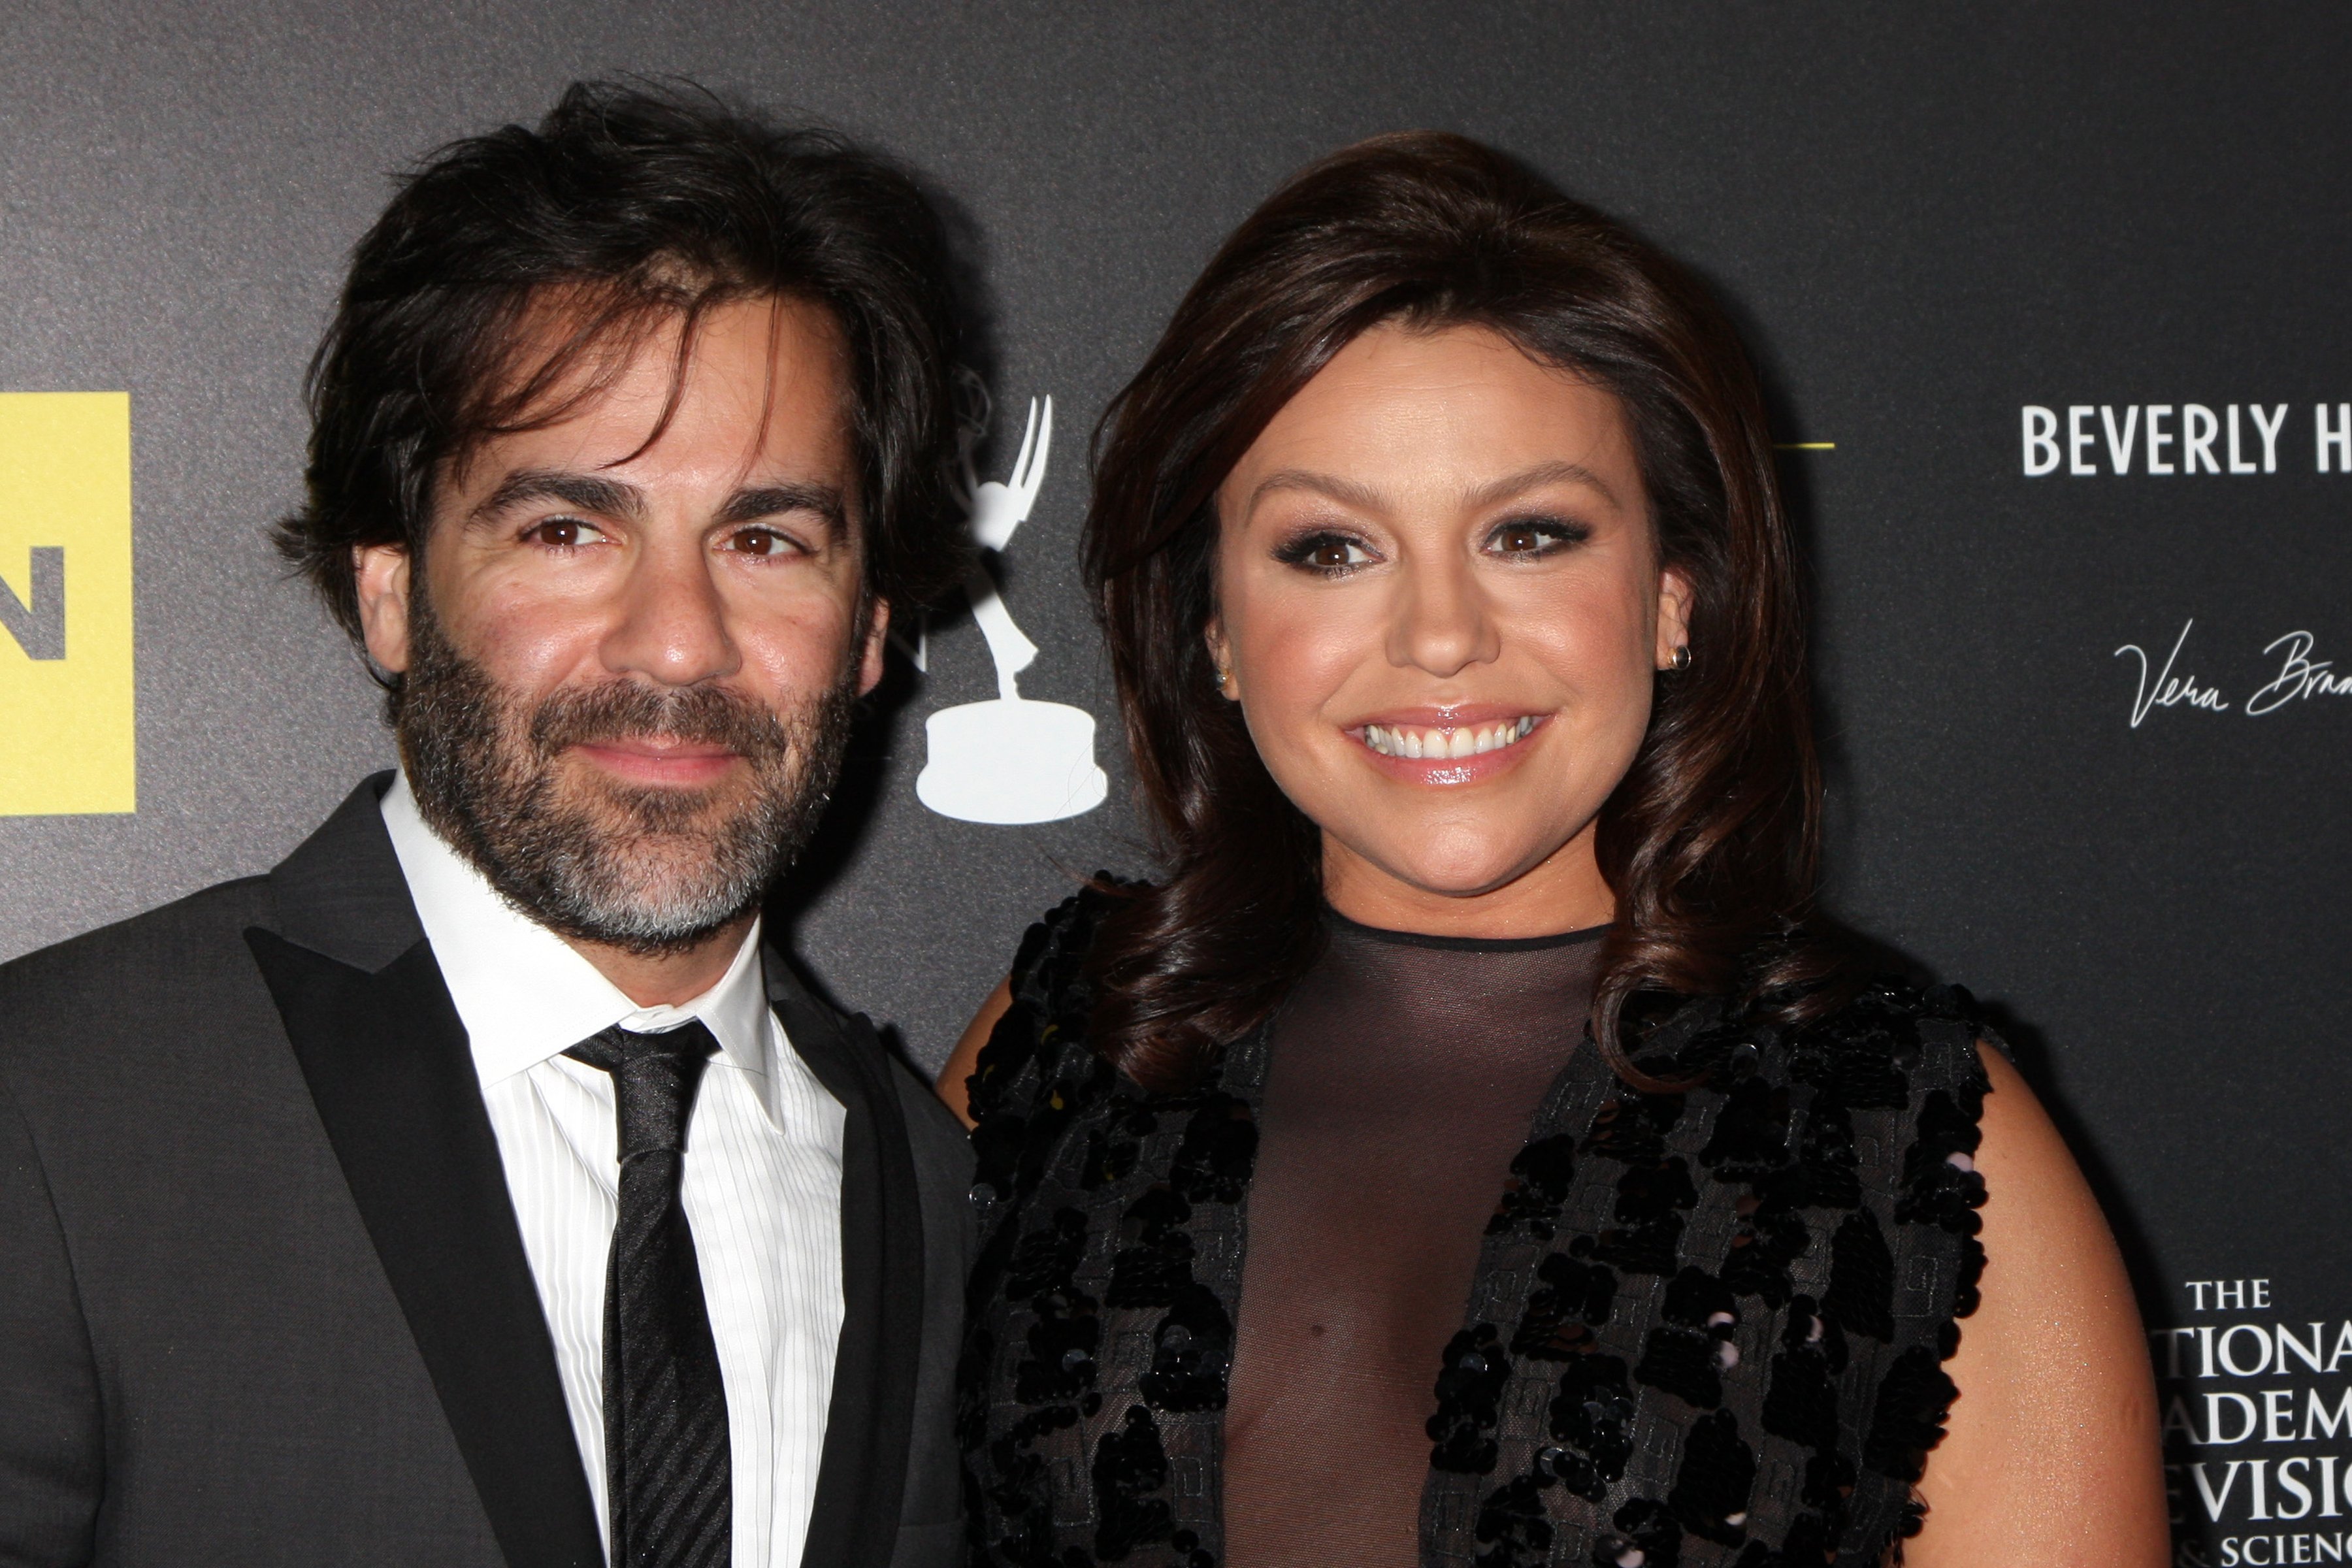 Rachael Ray and husband, John Cusimano at the Daytime Emmy Awards hosted in Beverly Hills, California in 2012. | Photo: Shutterstock. 